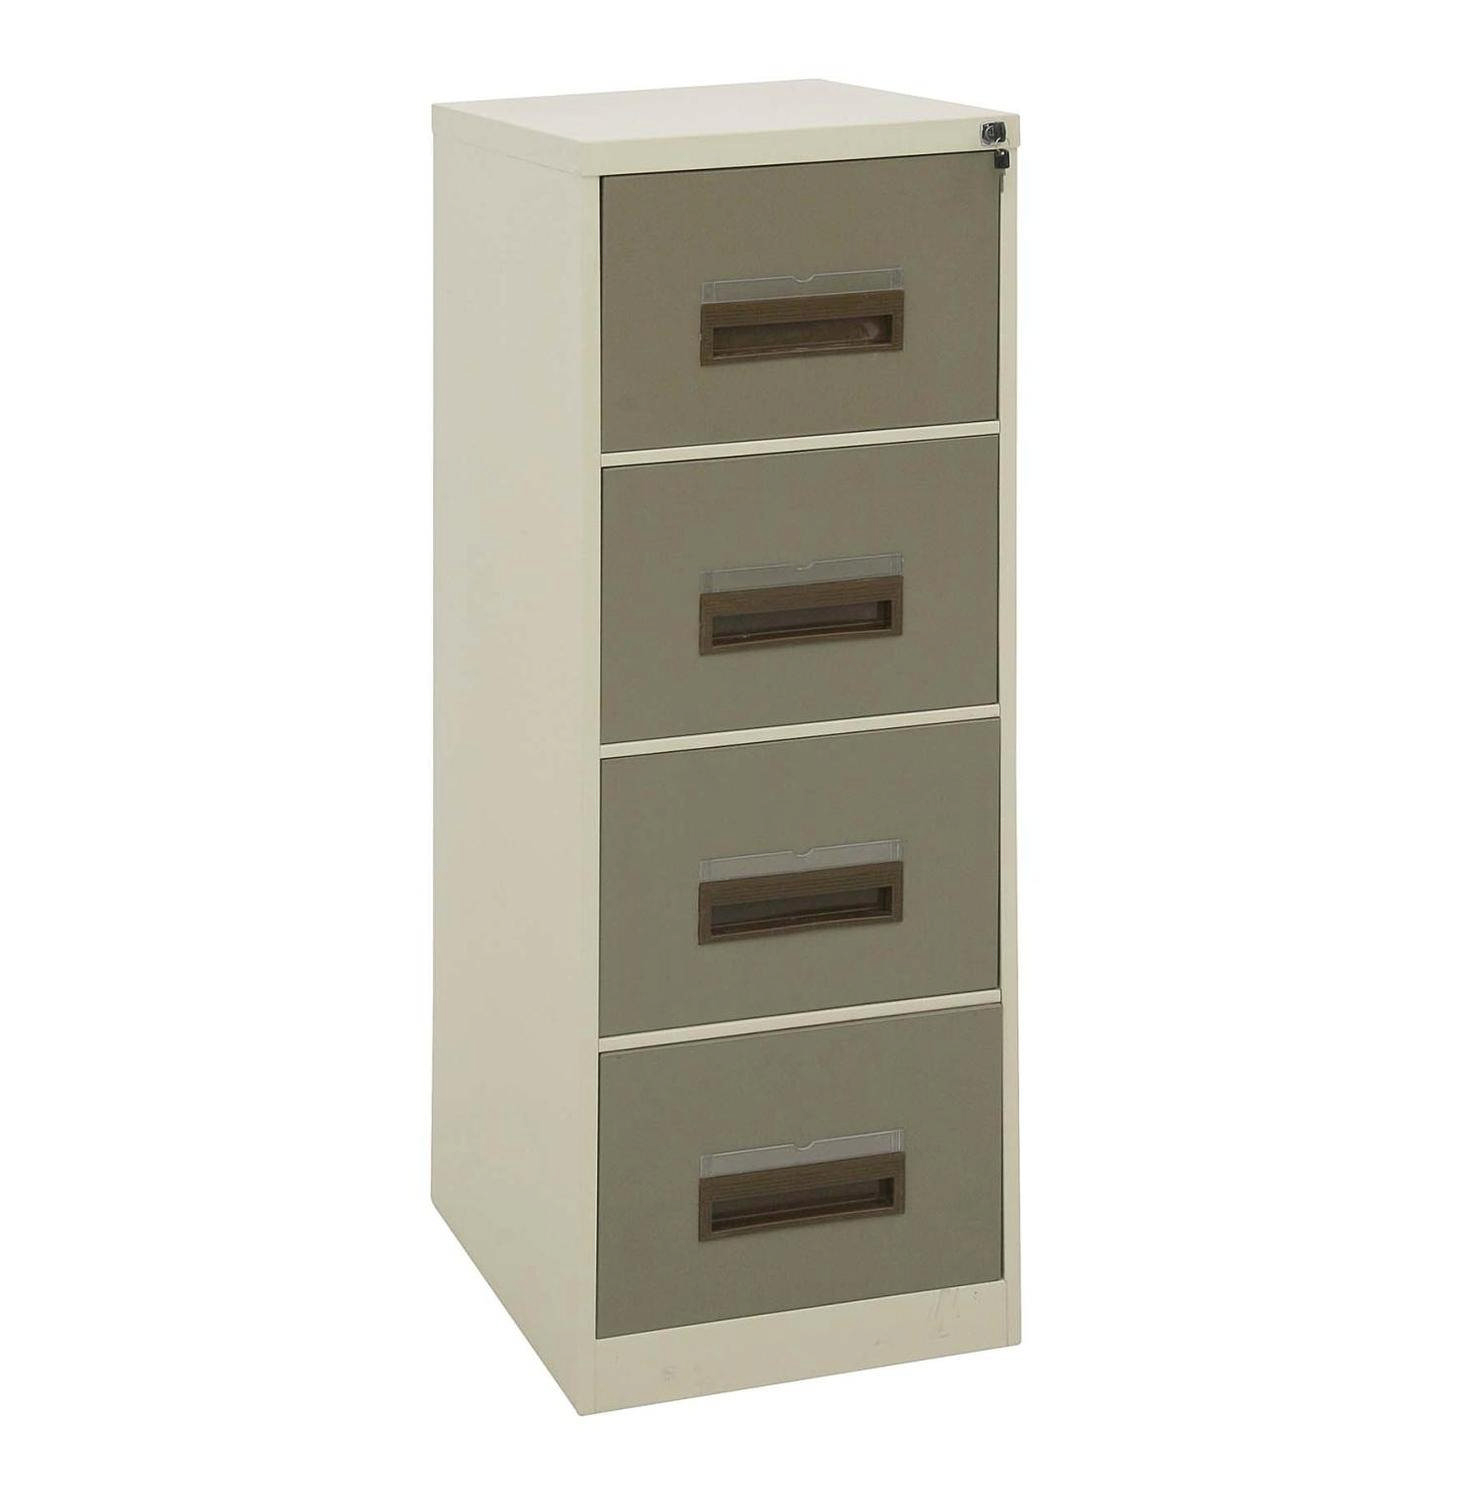 File Cabinets Astounding 4 Drawer File Cabinet Metal Wardrobe with sizing 1460 X 1500